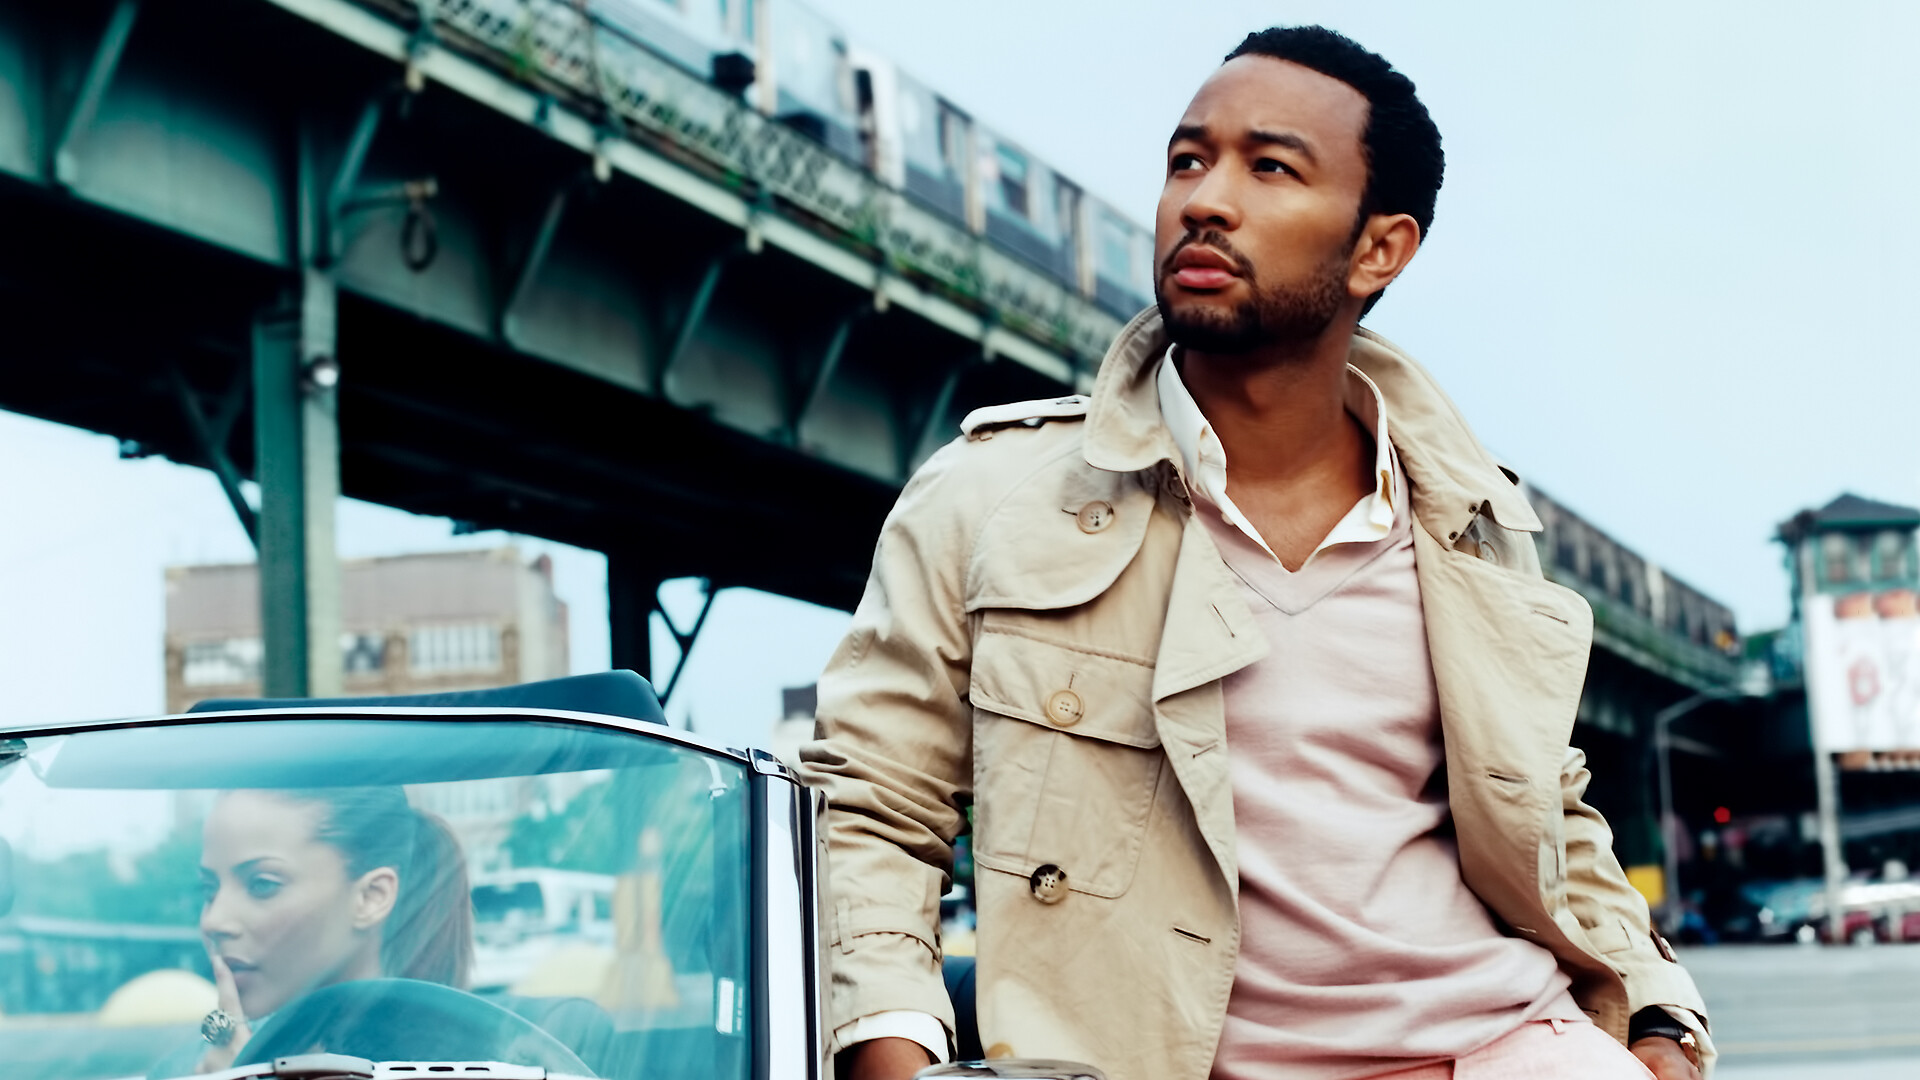 John Legend: The single "Made to Love" was released on June 18, 2013. 1920x1080 Full HD Background.